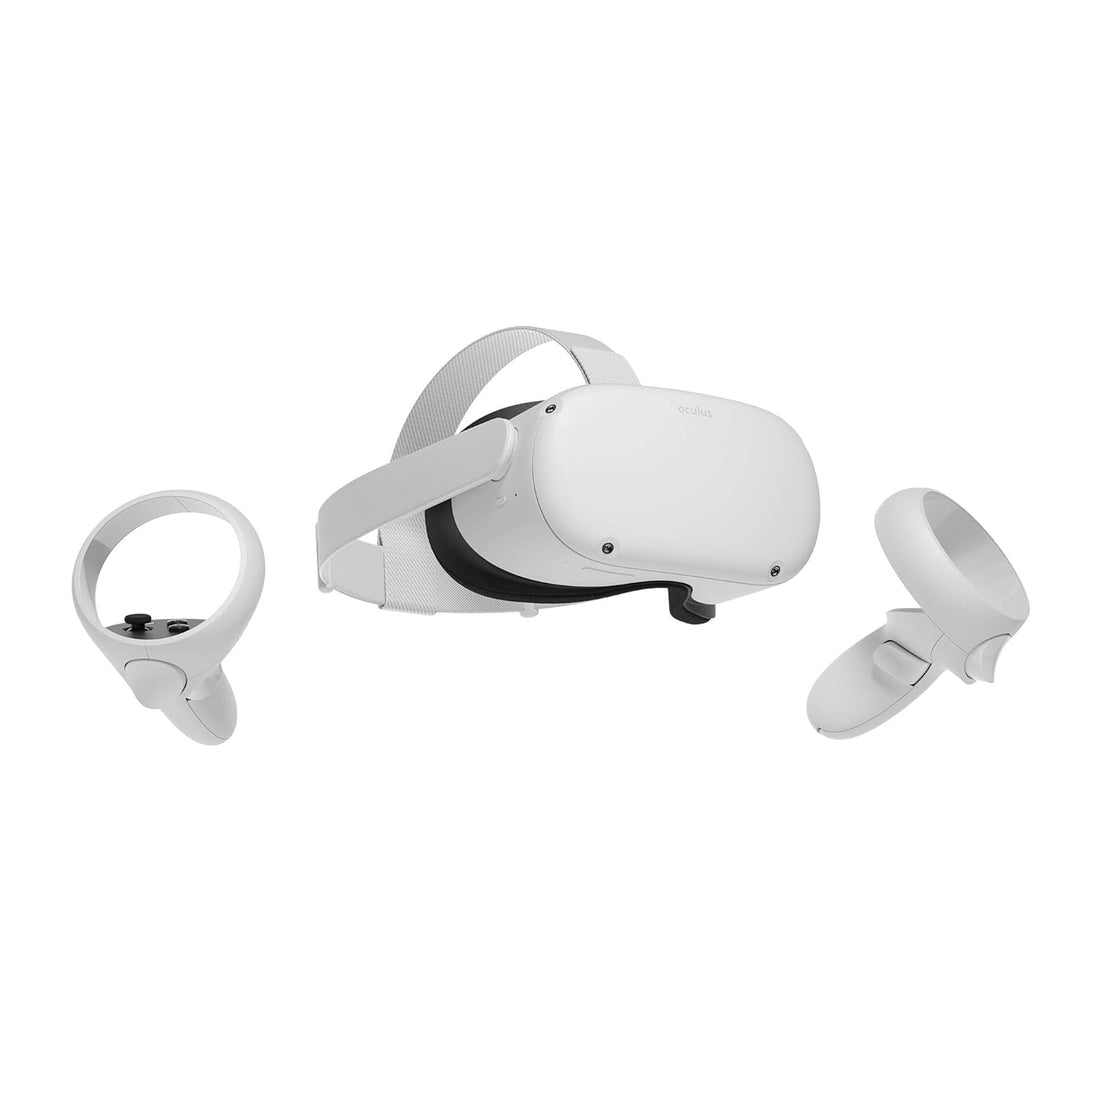 Oculus Quest 2 Advanced All-in-One Virtual Reality Headset - 64 GB - White (Refurbished)